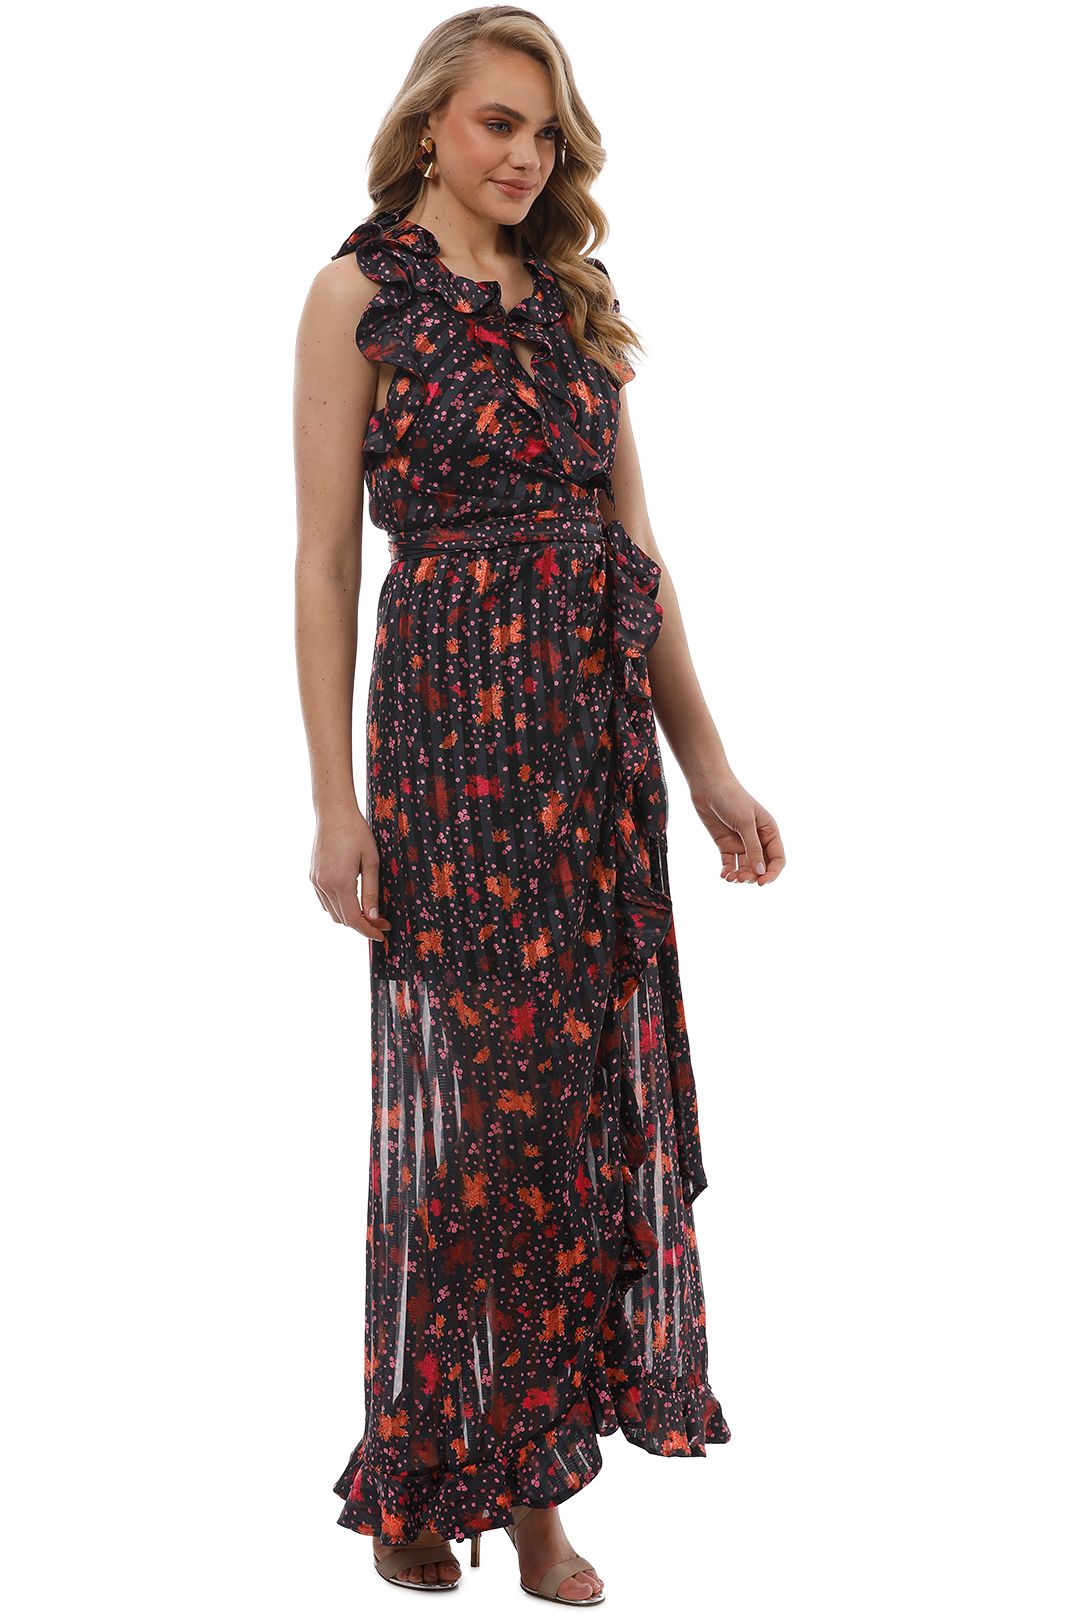 CMEO Collective - Significant Gown - Black Rose - Side